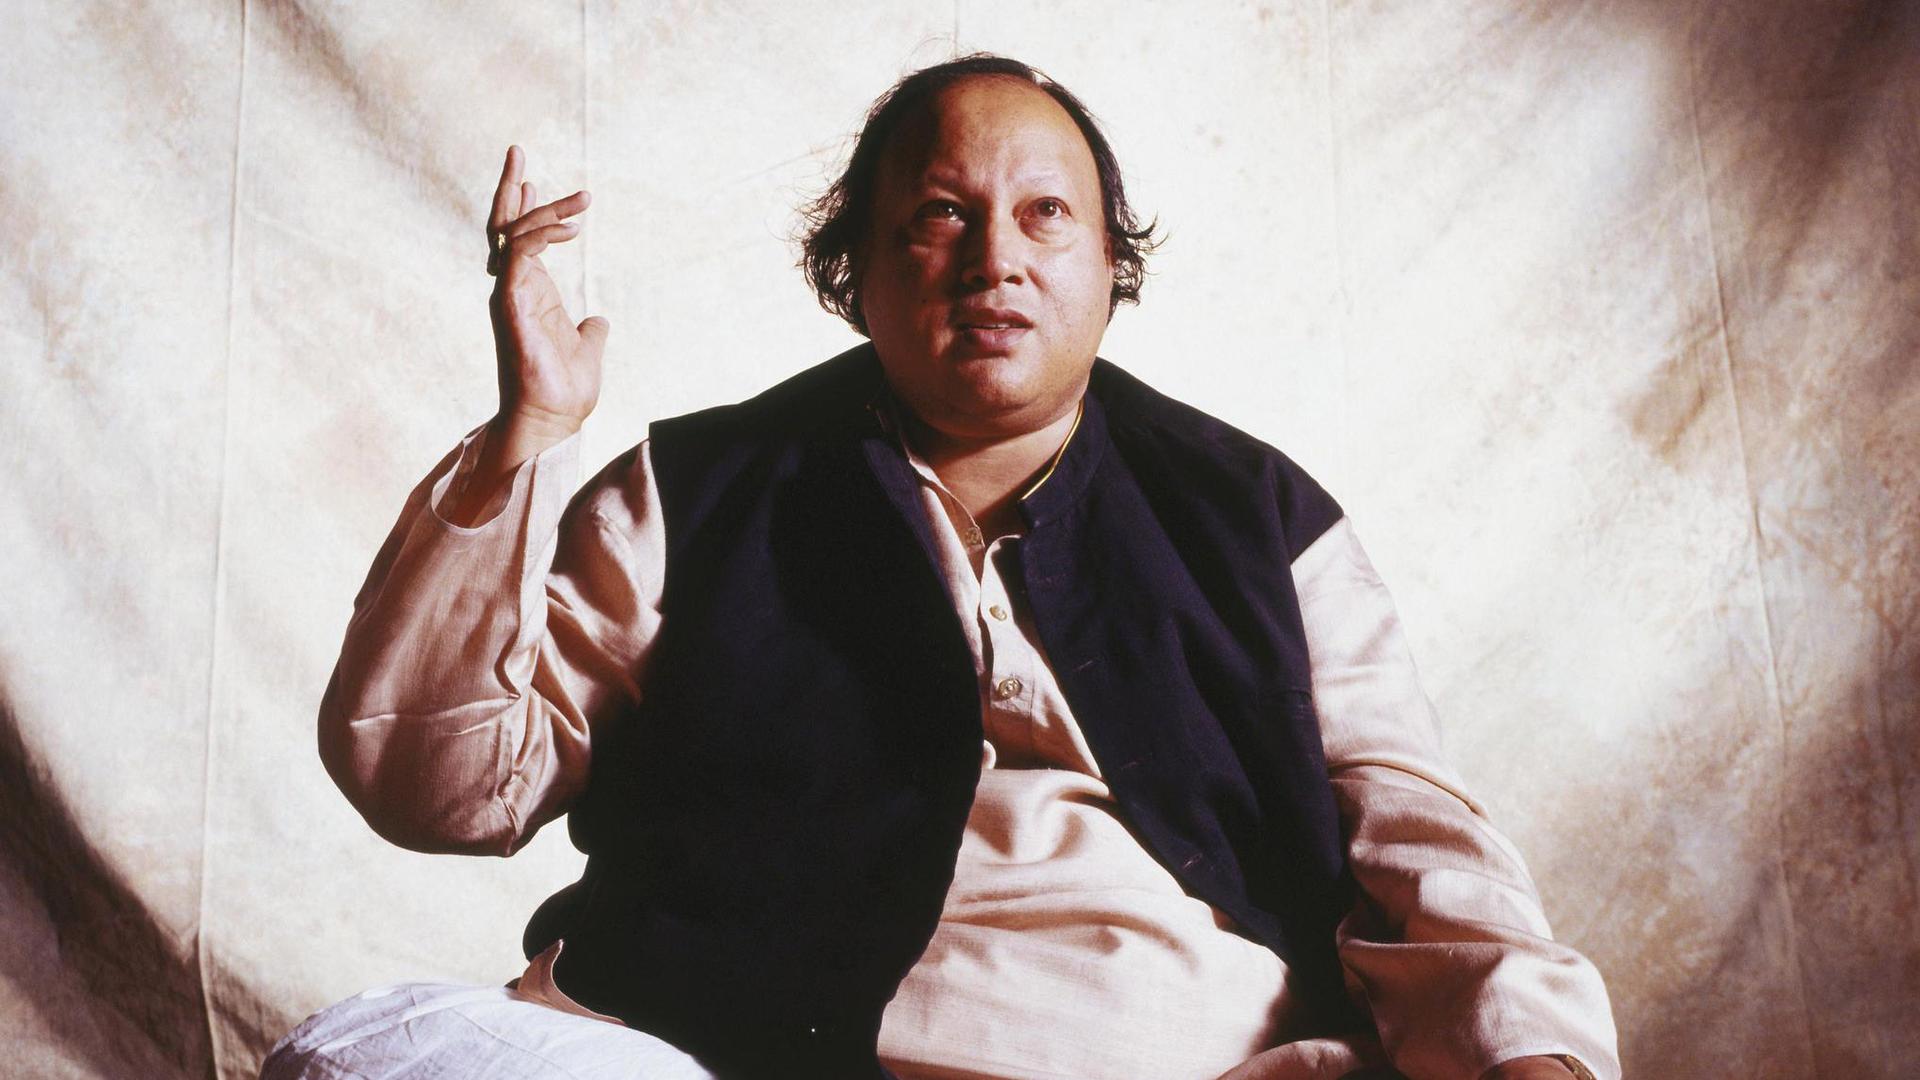 Nusrat Fateh Ali Khan, the Pakistani singer who is known for bringing Qawwali music to a global audience.